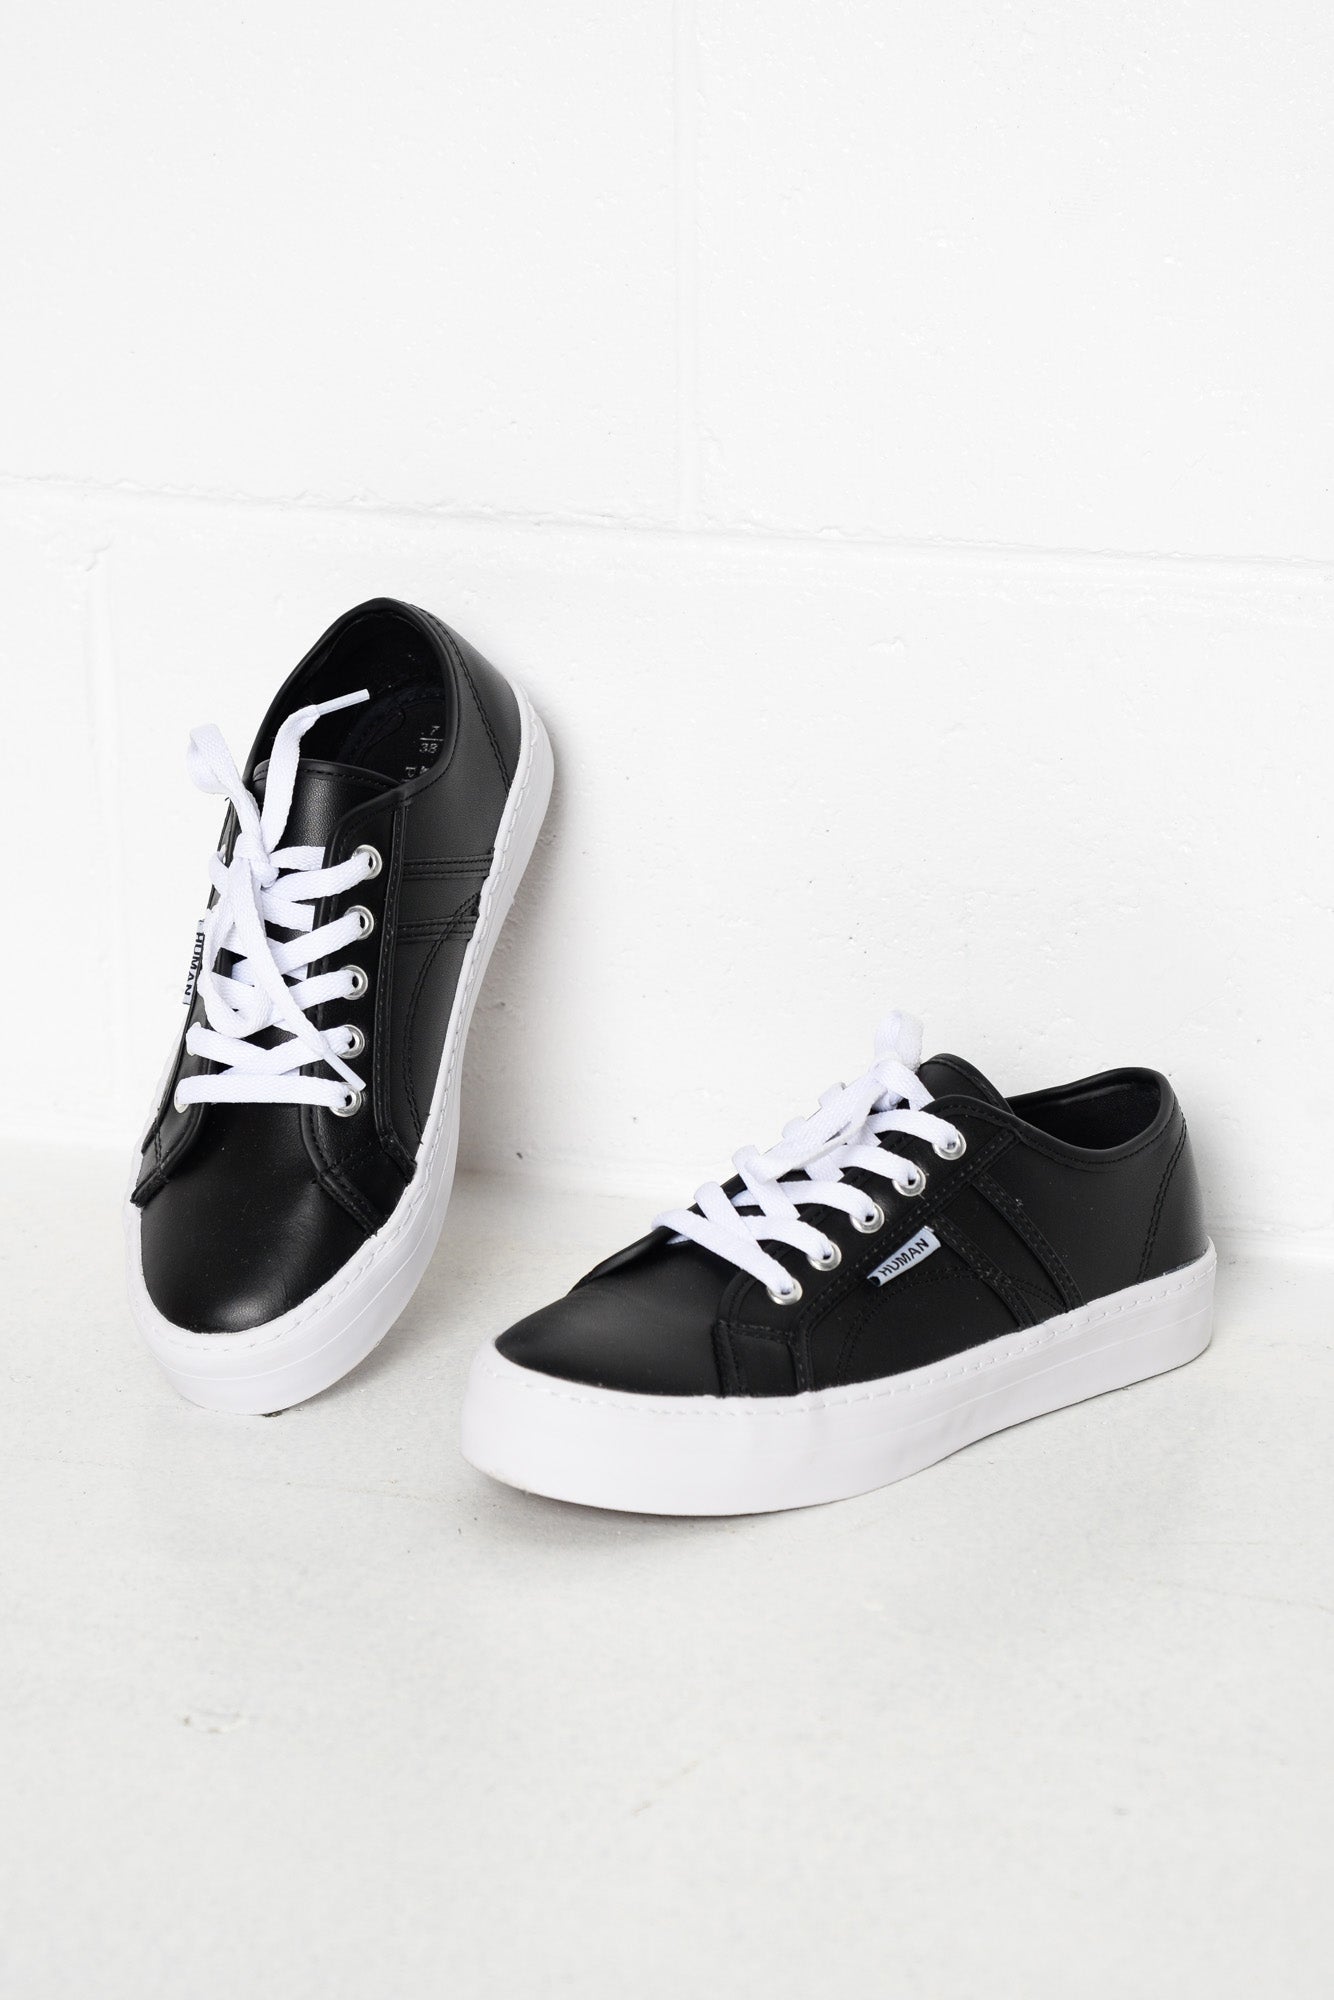 black leather sneakers white sole